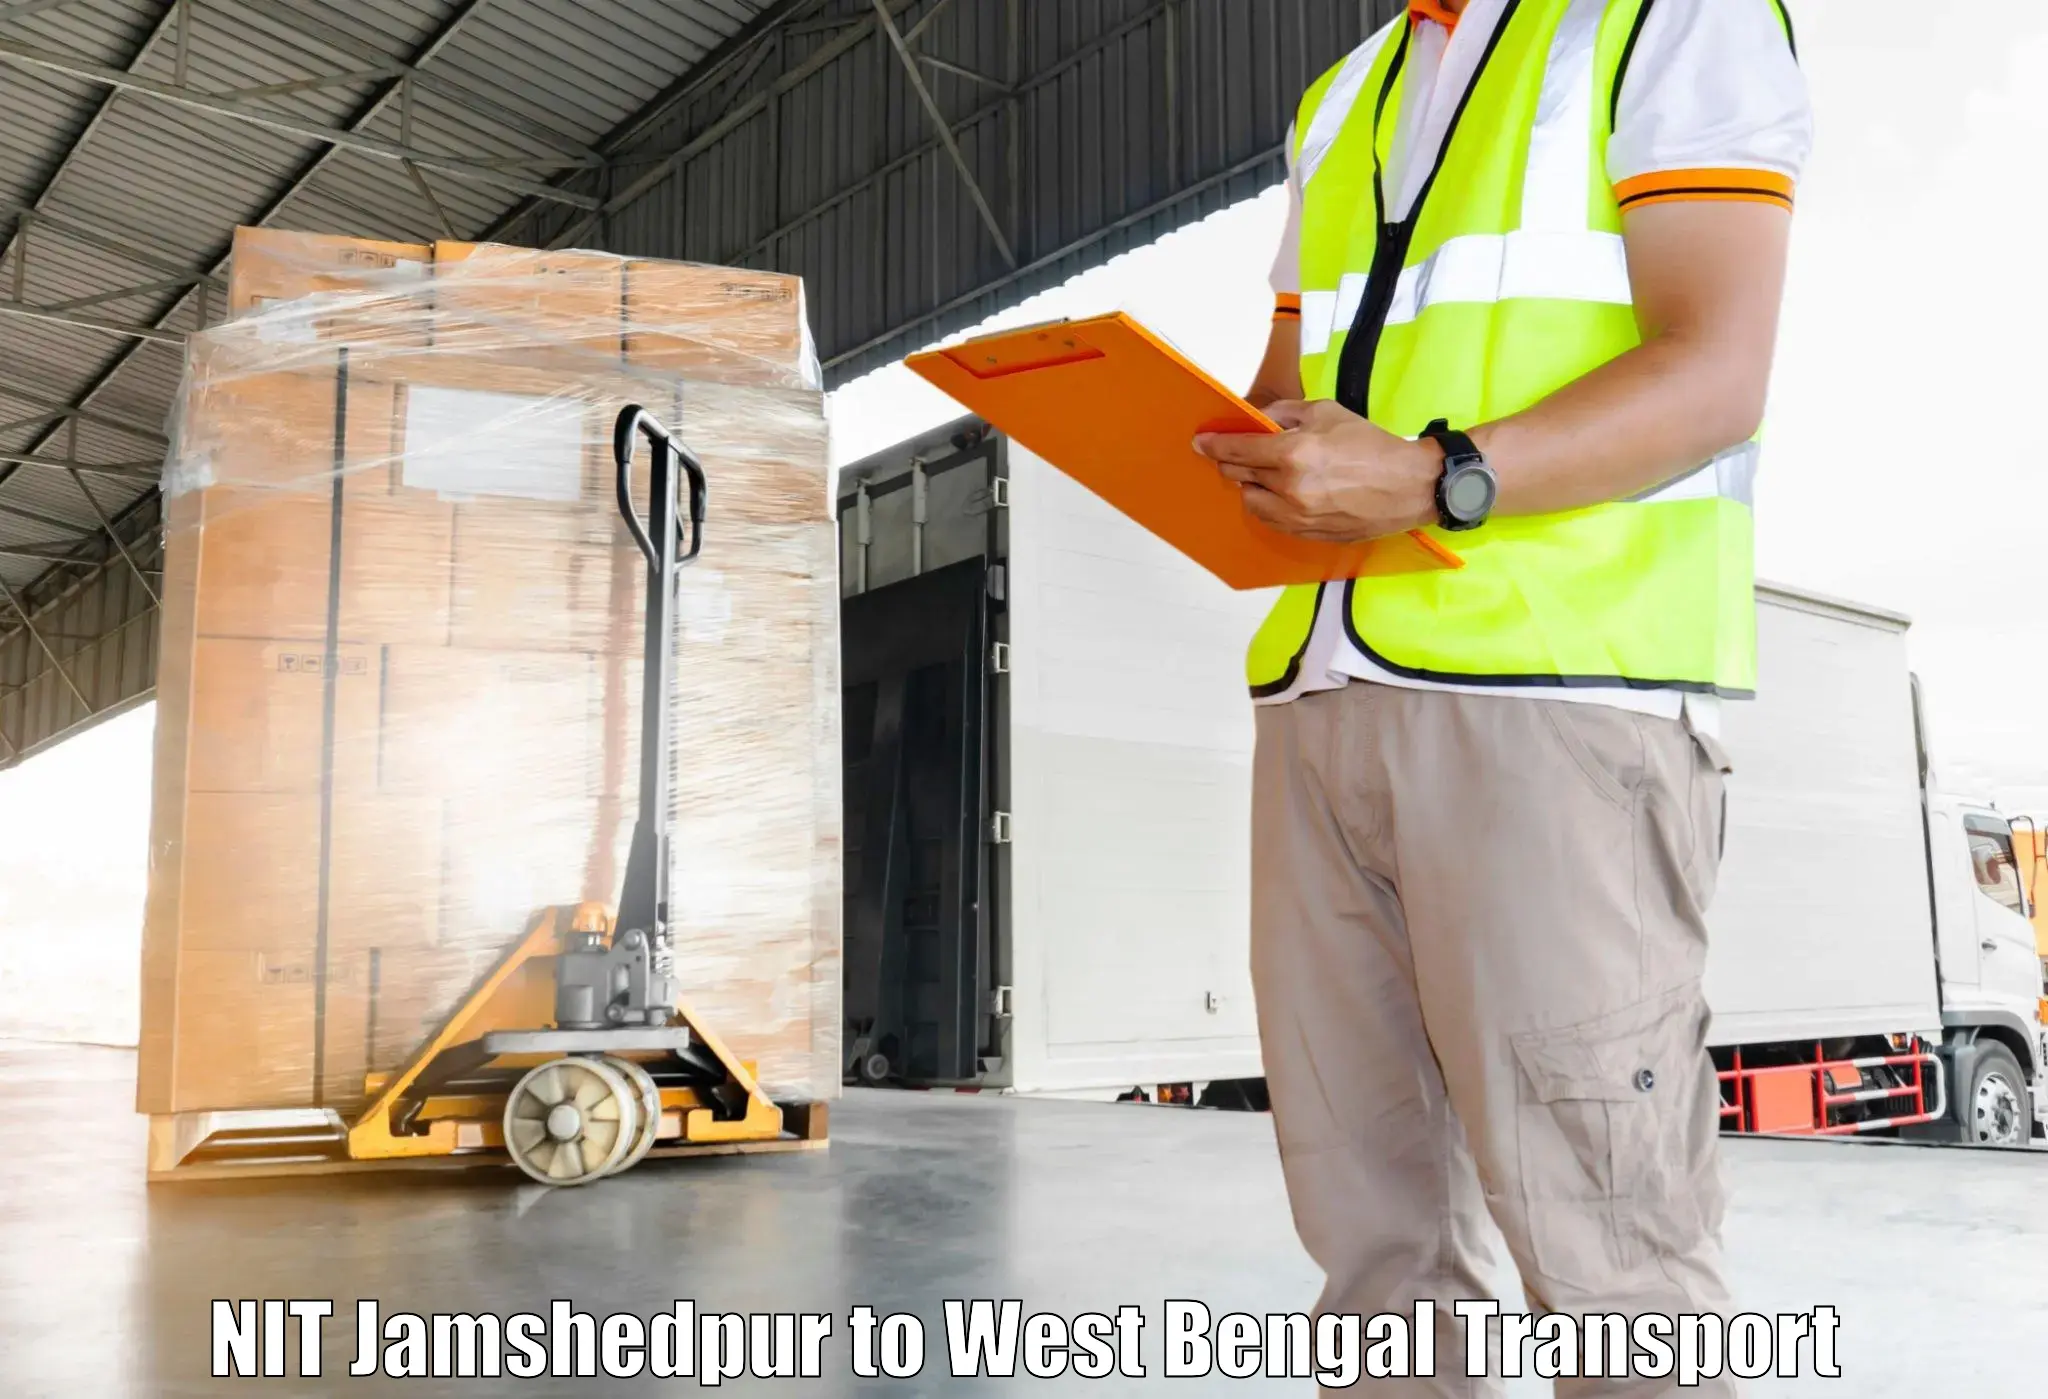 Cargo transport services NIT Jamshedpur to Midnapore